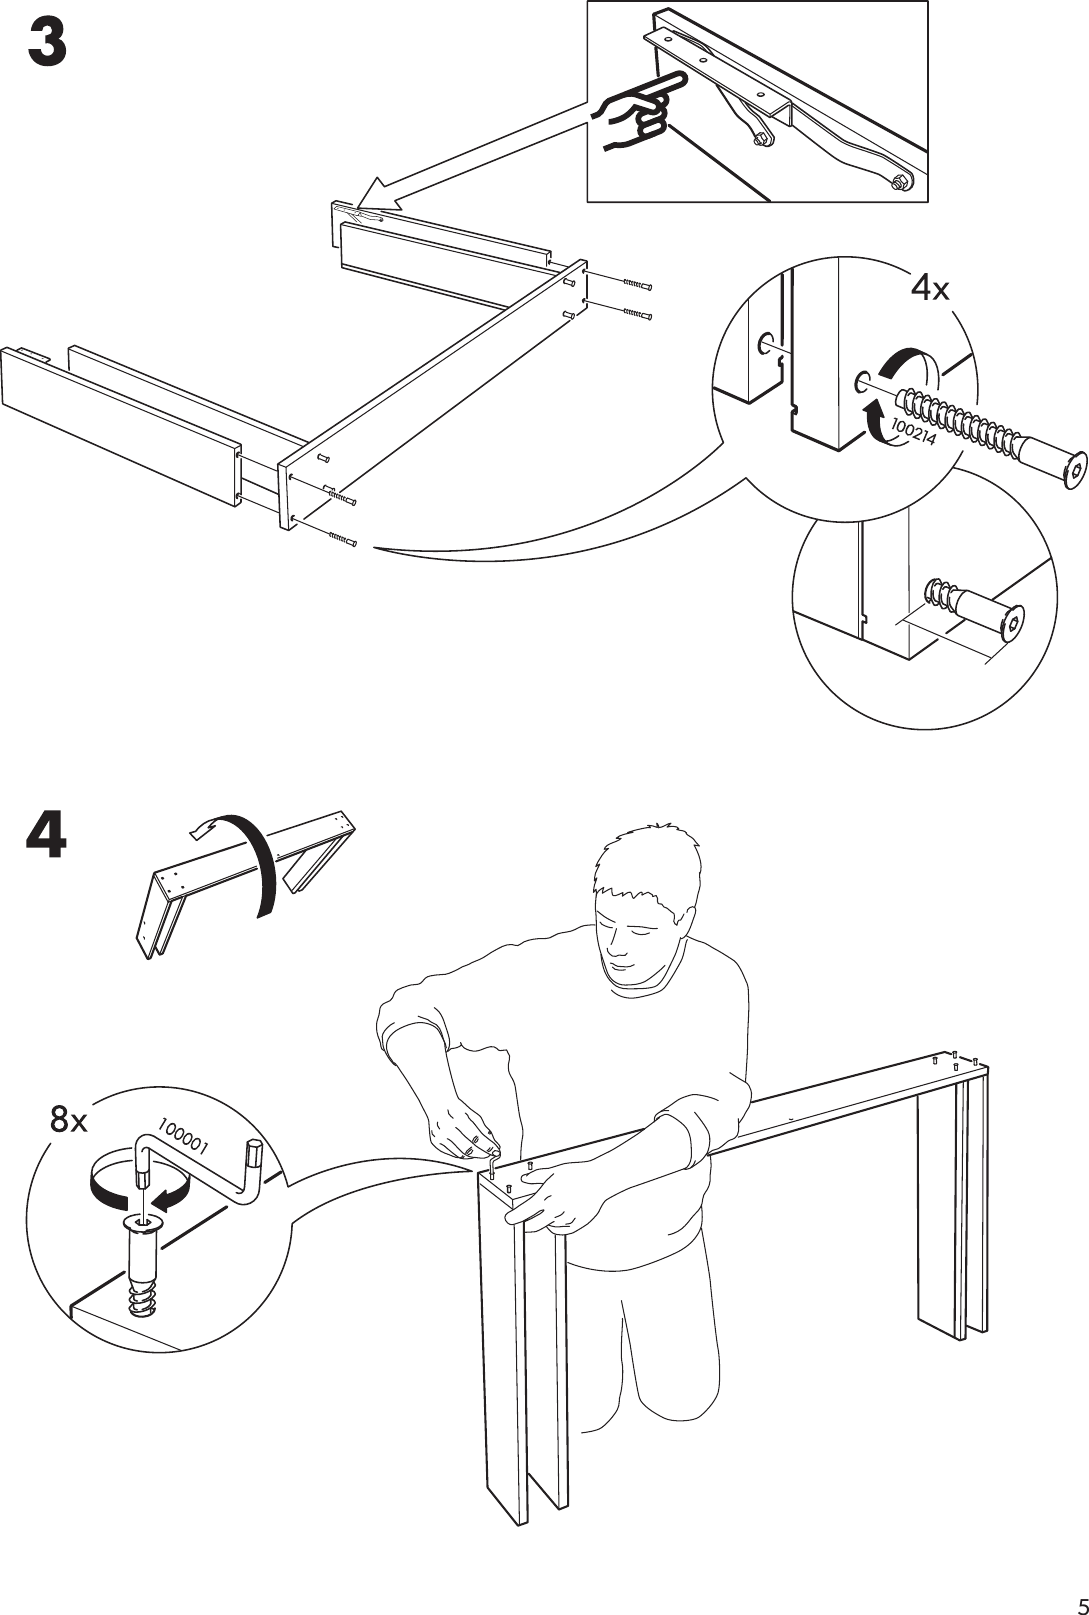 Page 5 of 12 - Ikea Ikea-Hagalund-Sofa-Bed-Frame-Assembly-Instruction